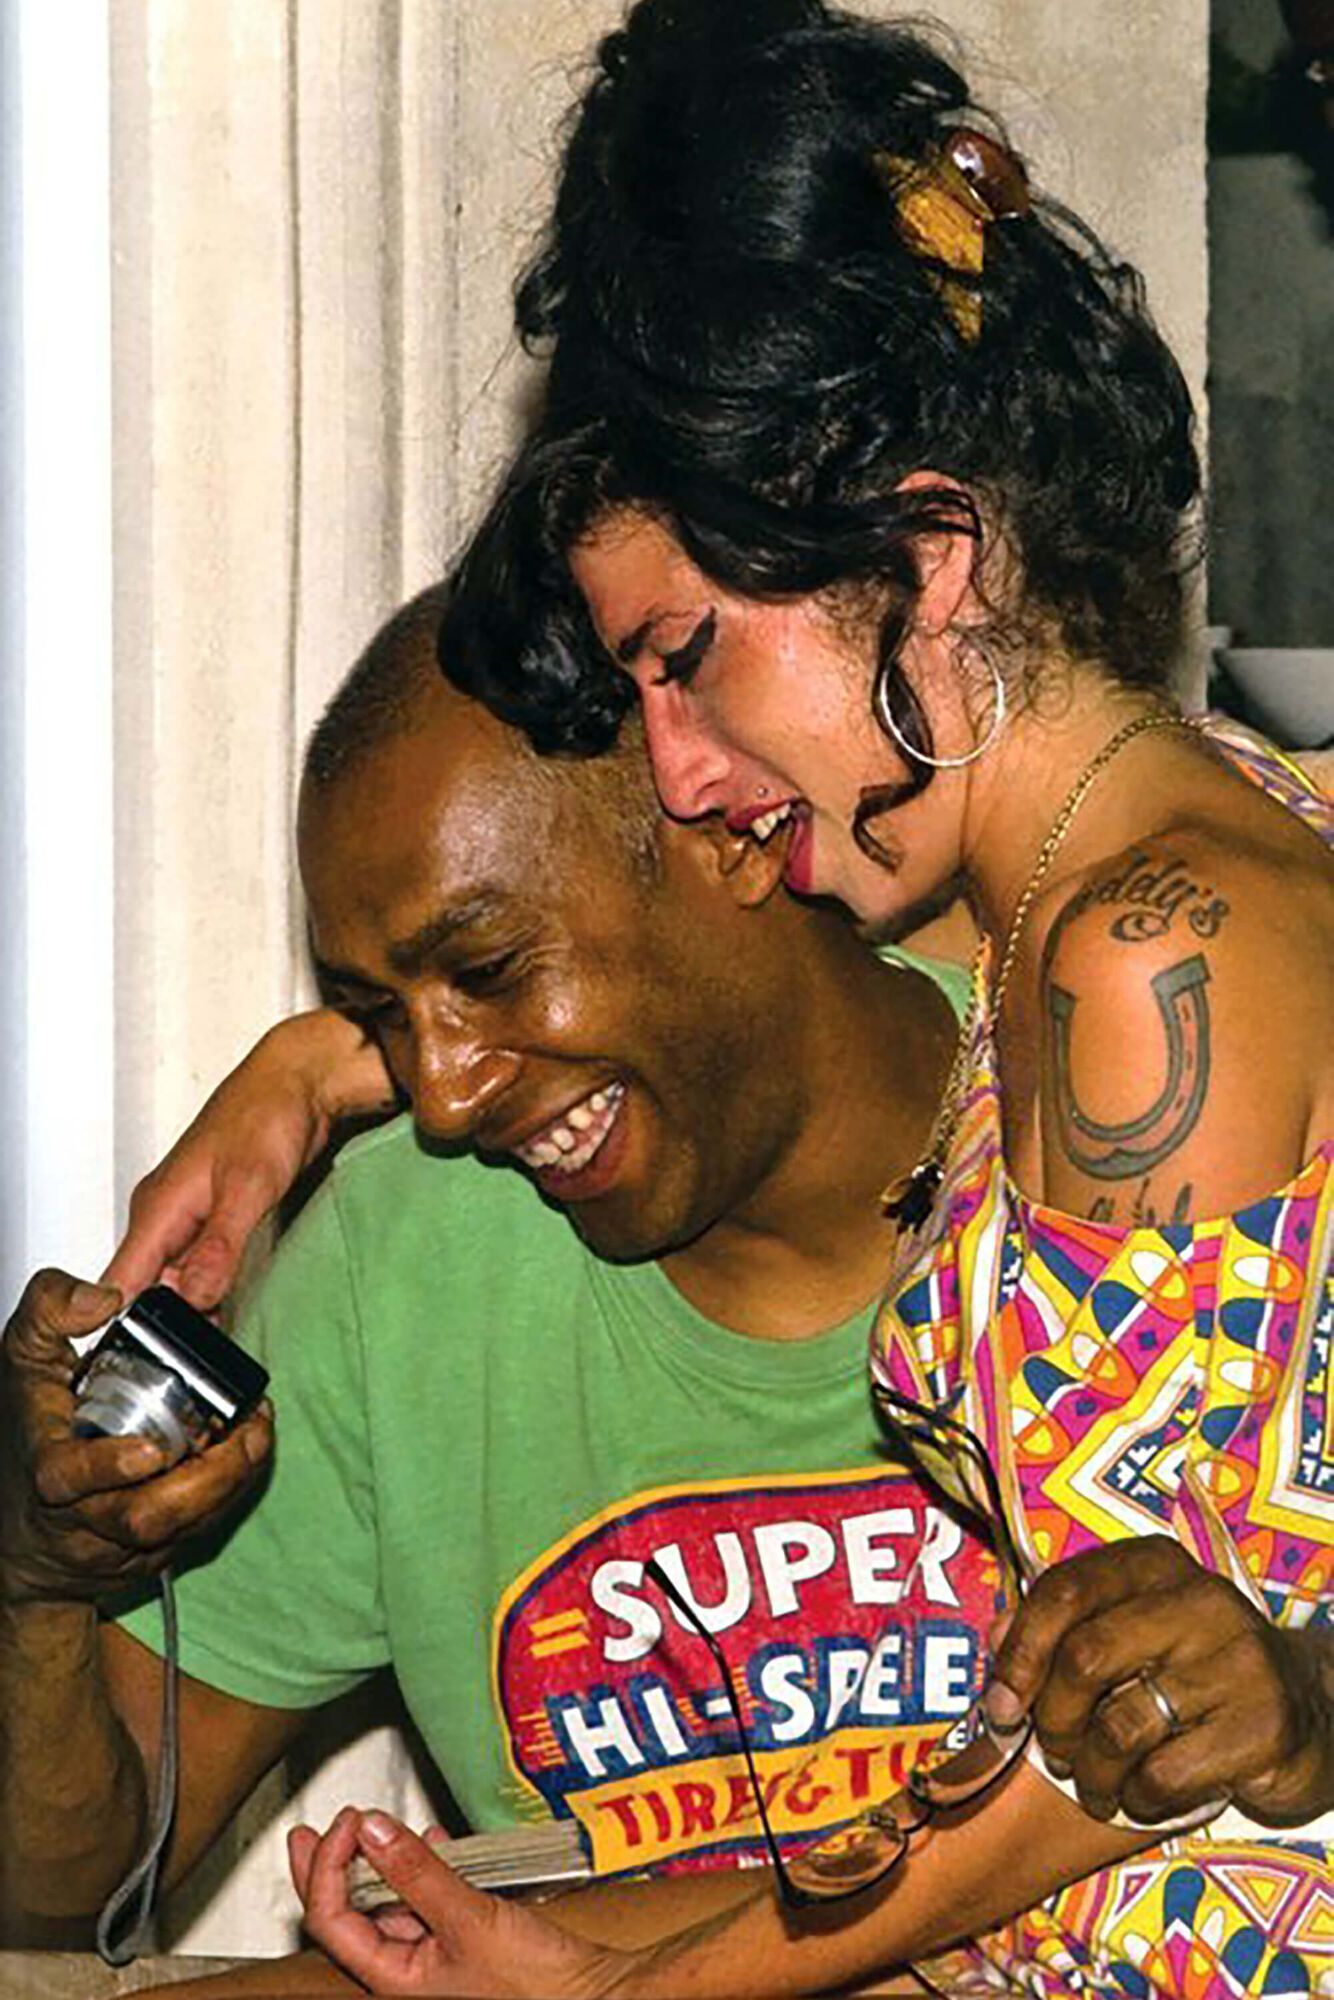 Amy Winehouse's close friend says they had a conversation hours before her tragic death